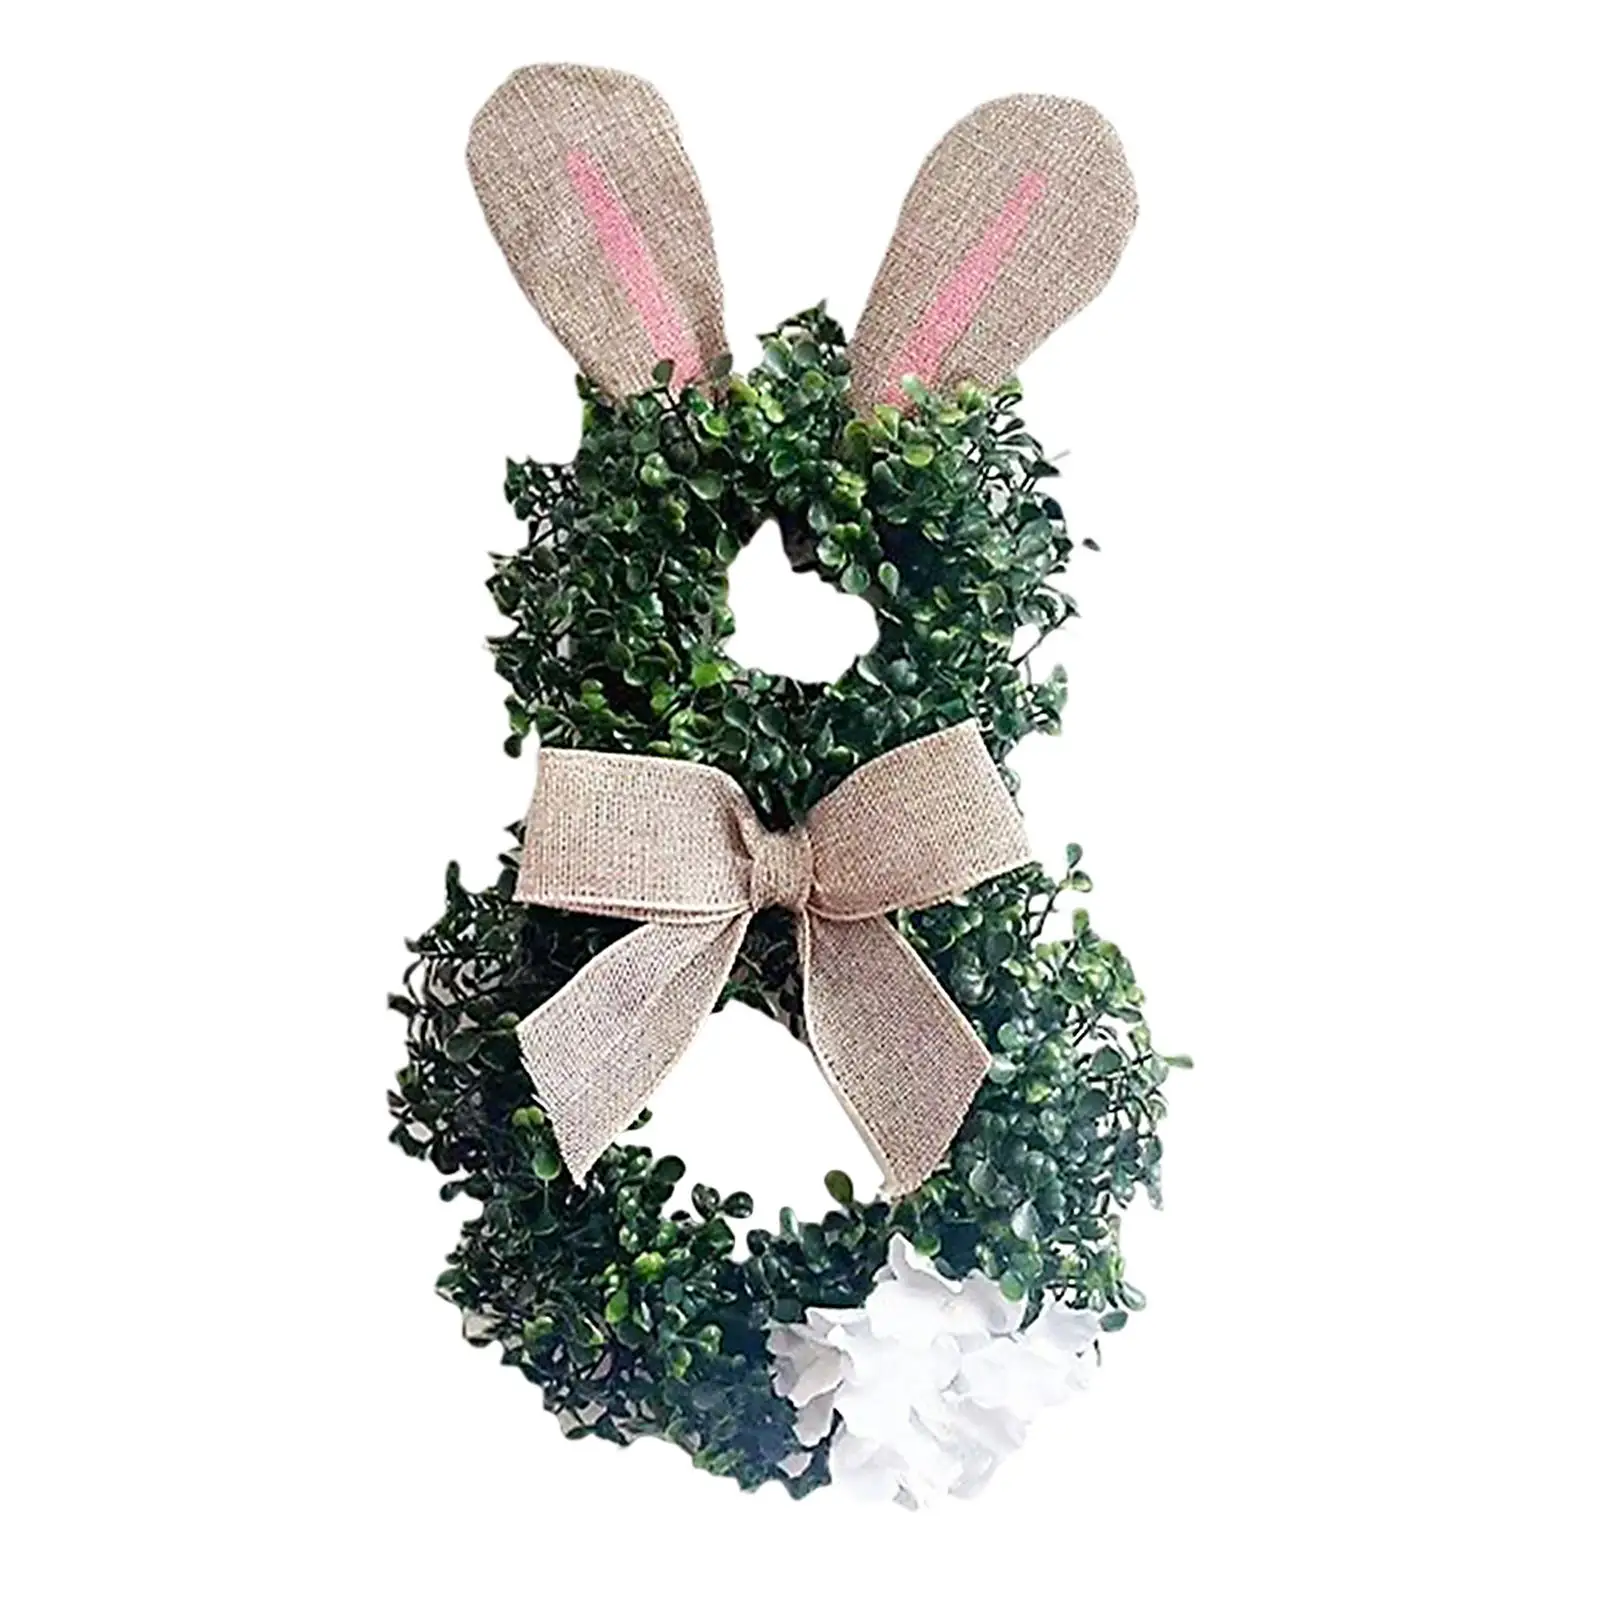  Creative Handicrafts Happy Easter with Bow Knot for Easter Indoor Party Supply Festival Decorations